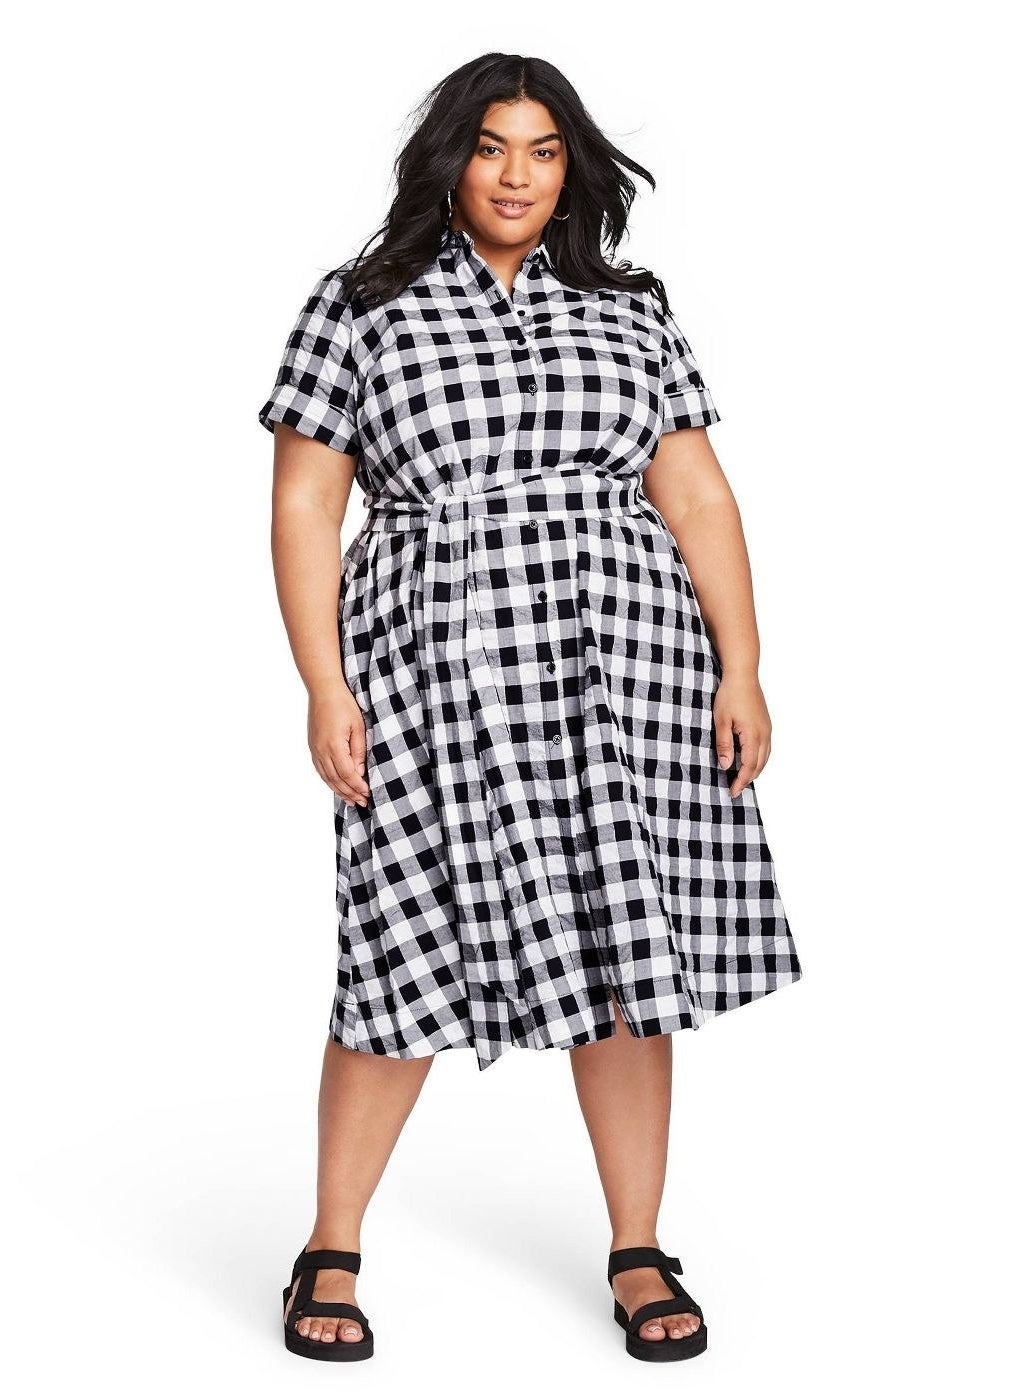 31 Of The Best Plus-Size Dresses You Can Get At Target